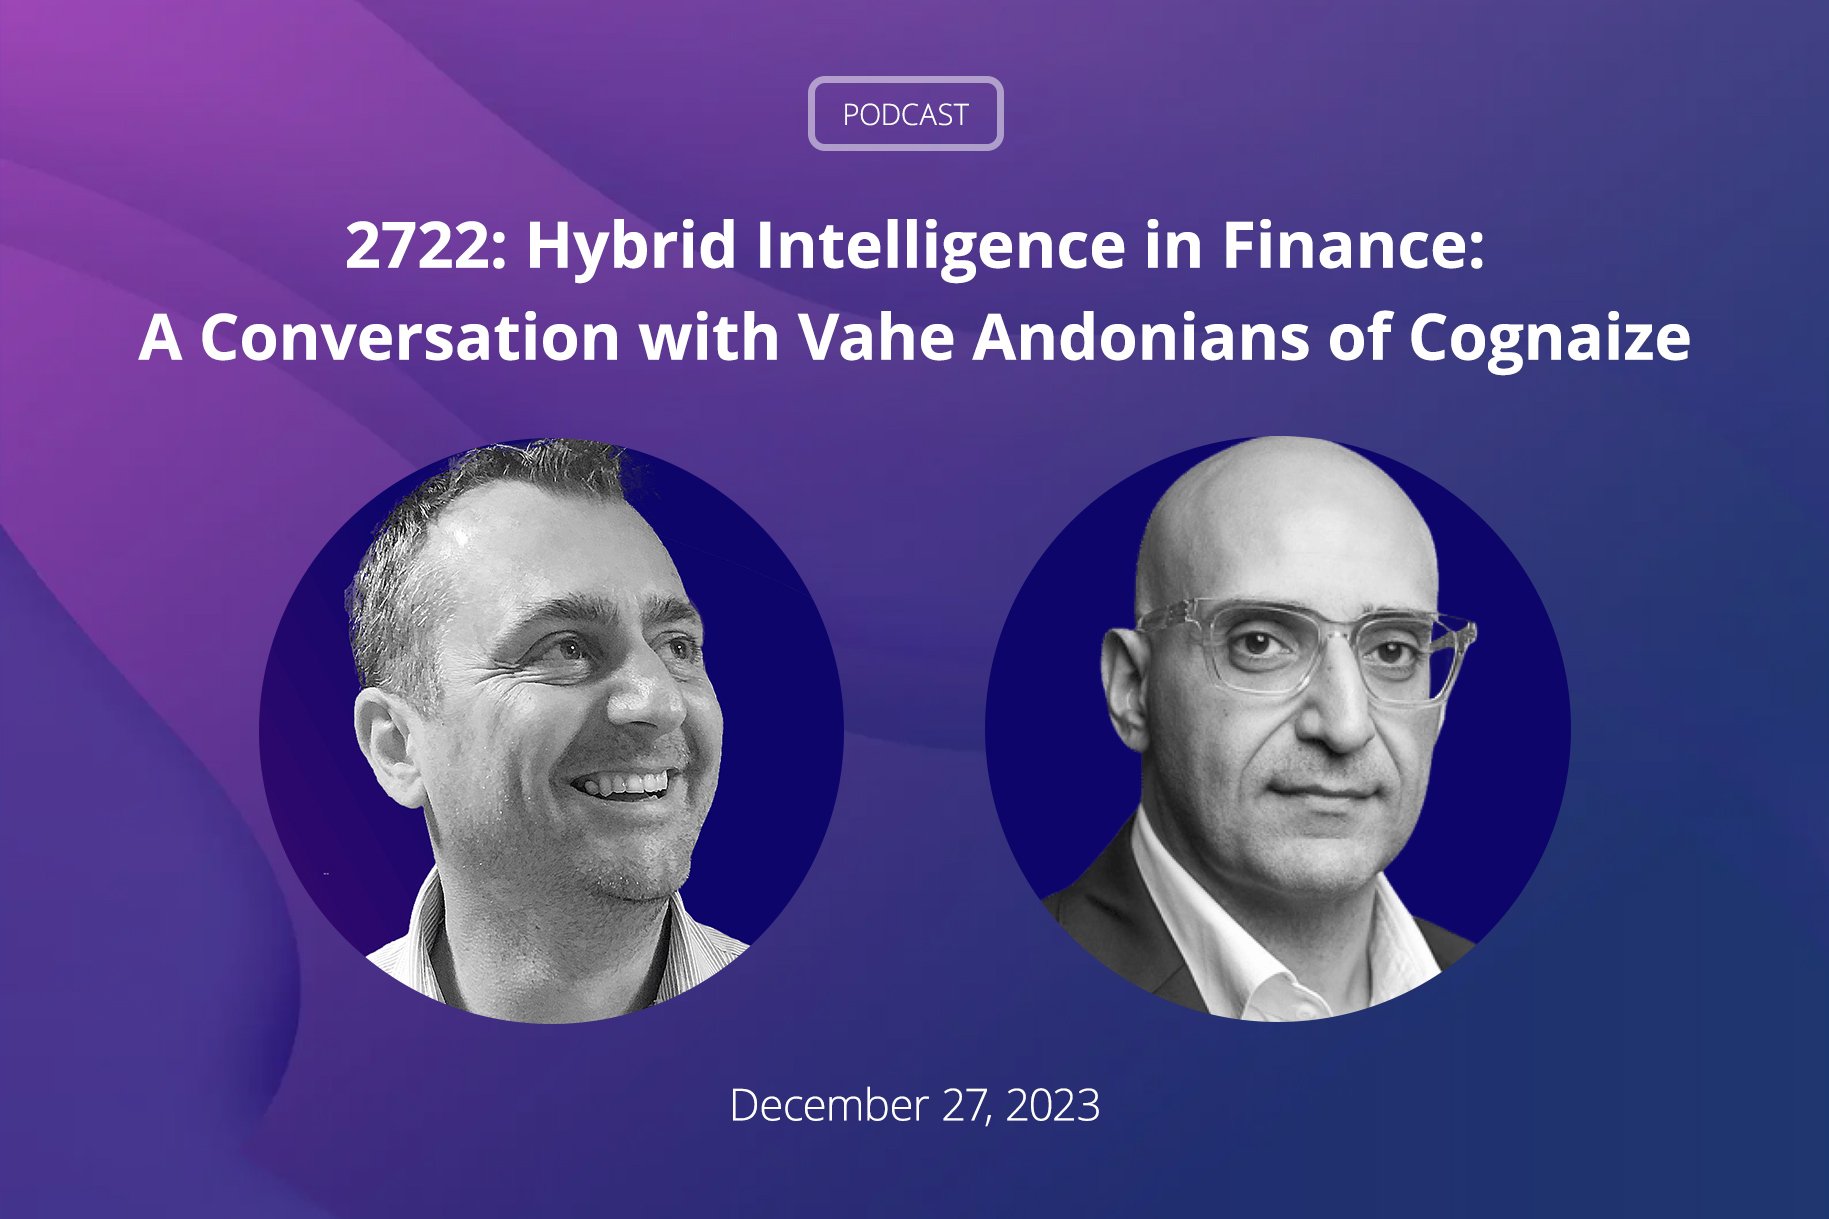 Hybrid-Intelligence-in-Finance-_-Tech-Talks-Daily-with-Vahe-Andonians